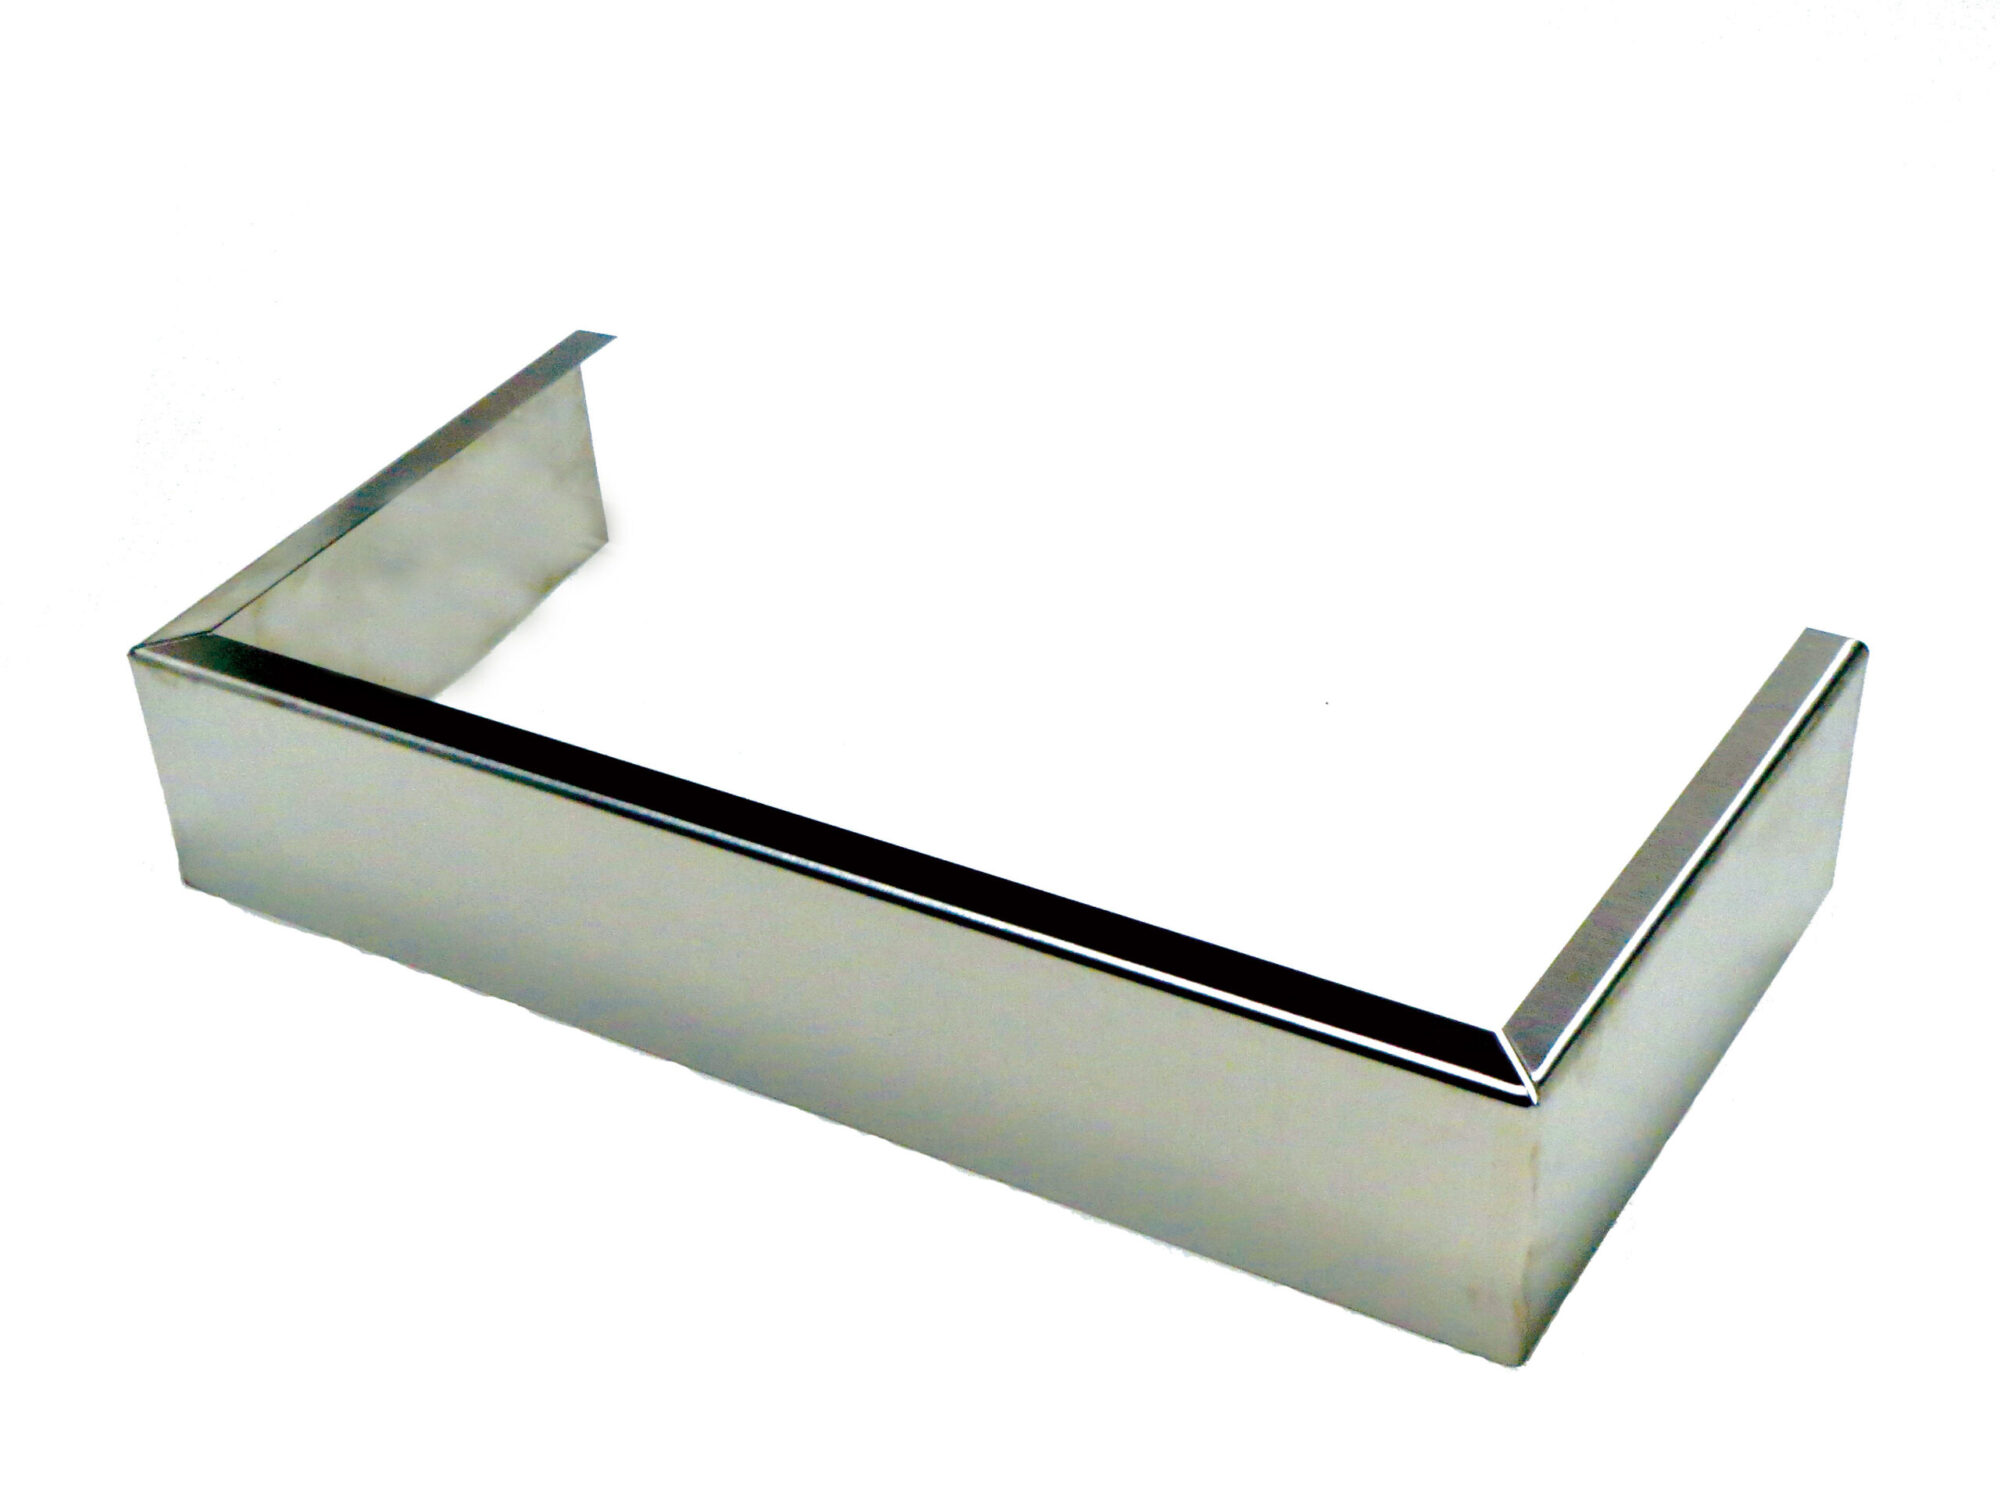 SK16 Drain Skirt For Wall Mount Tray - Fits 8" Wide Trays